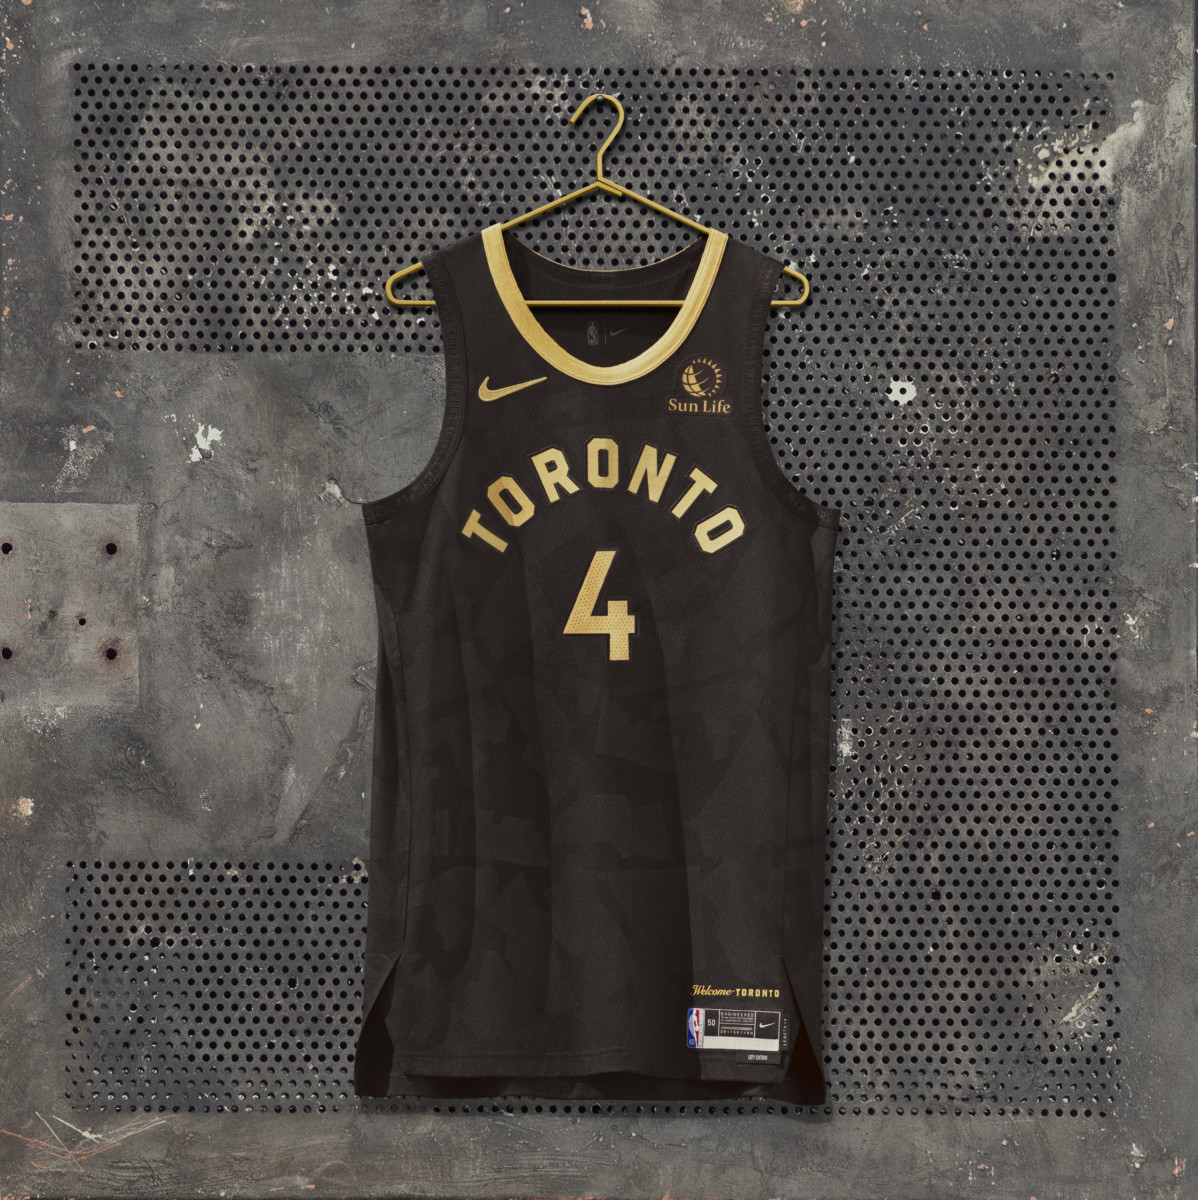 Ranking all City Edition uniforms for 2022-23